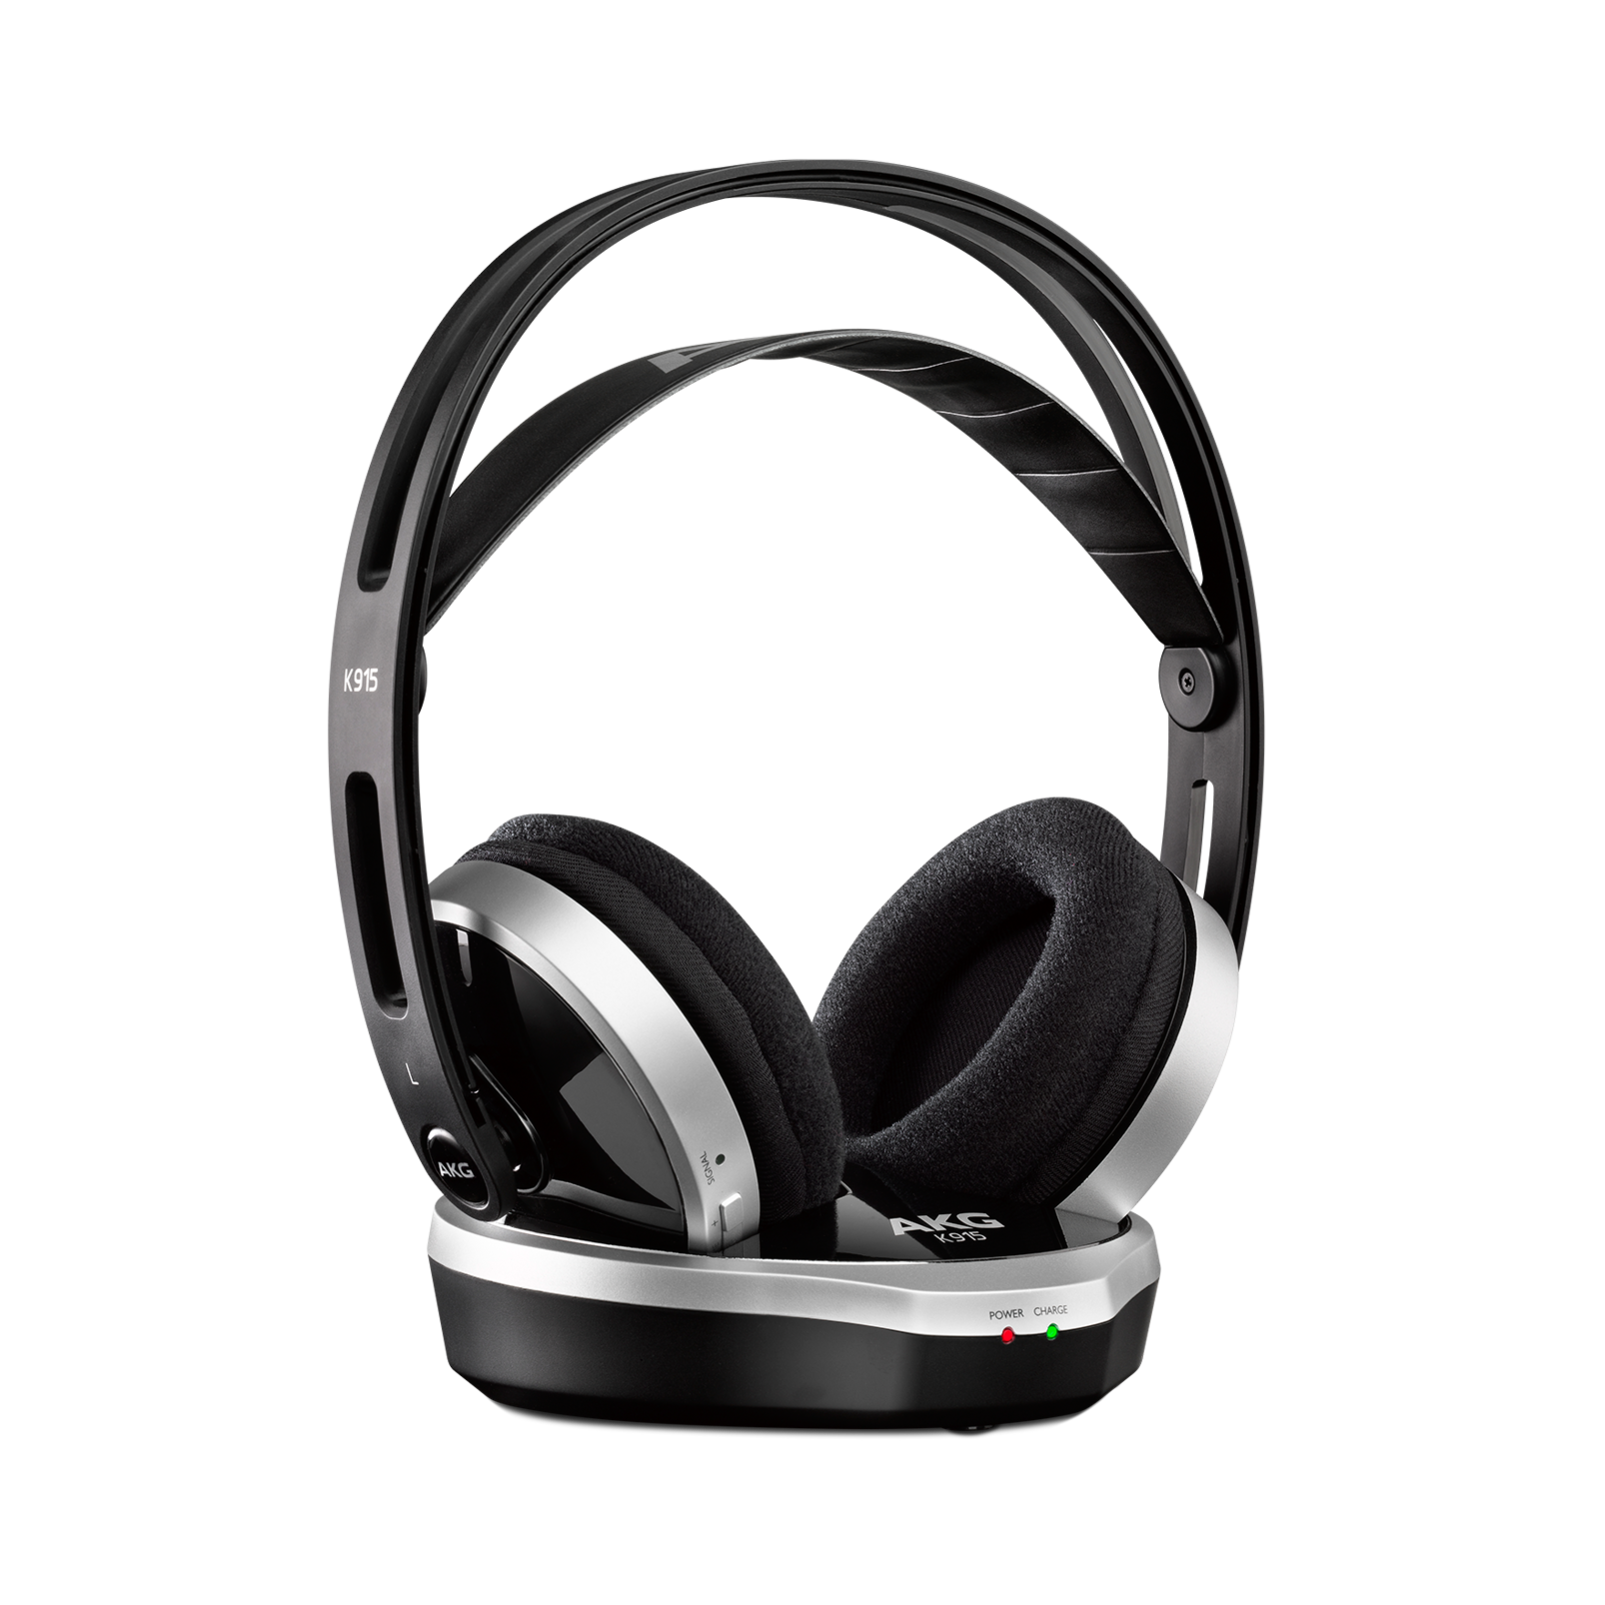 K 915 - Black - Digital wireless stereo headphone optimized for movies, games and music. - Detailshot 4